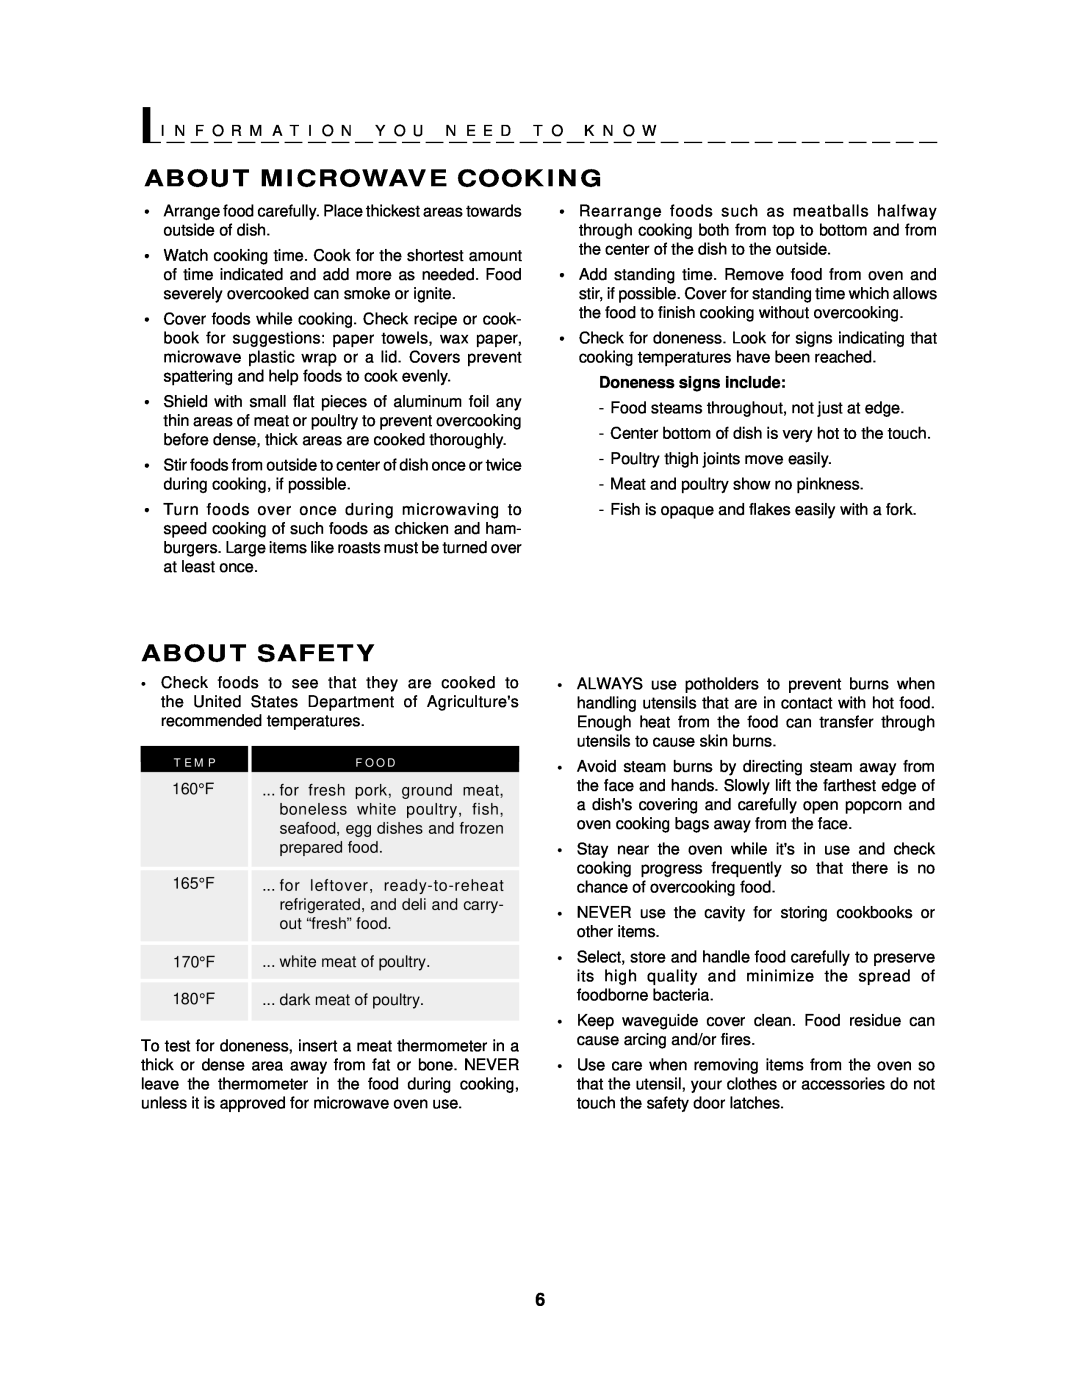 Sharp R-519E About Microwave Cooking, About Safety, T E M P, F O O D, I N F O R M A T I O N Y O U N E E D T O K N O W 